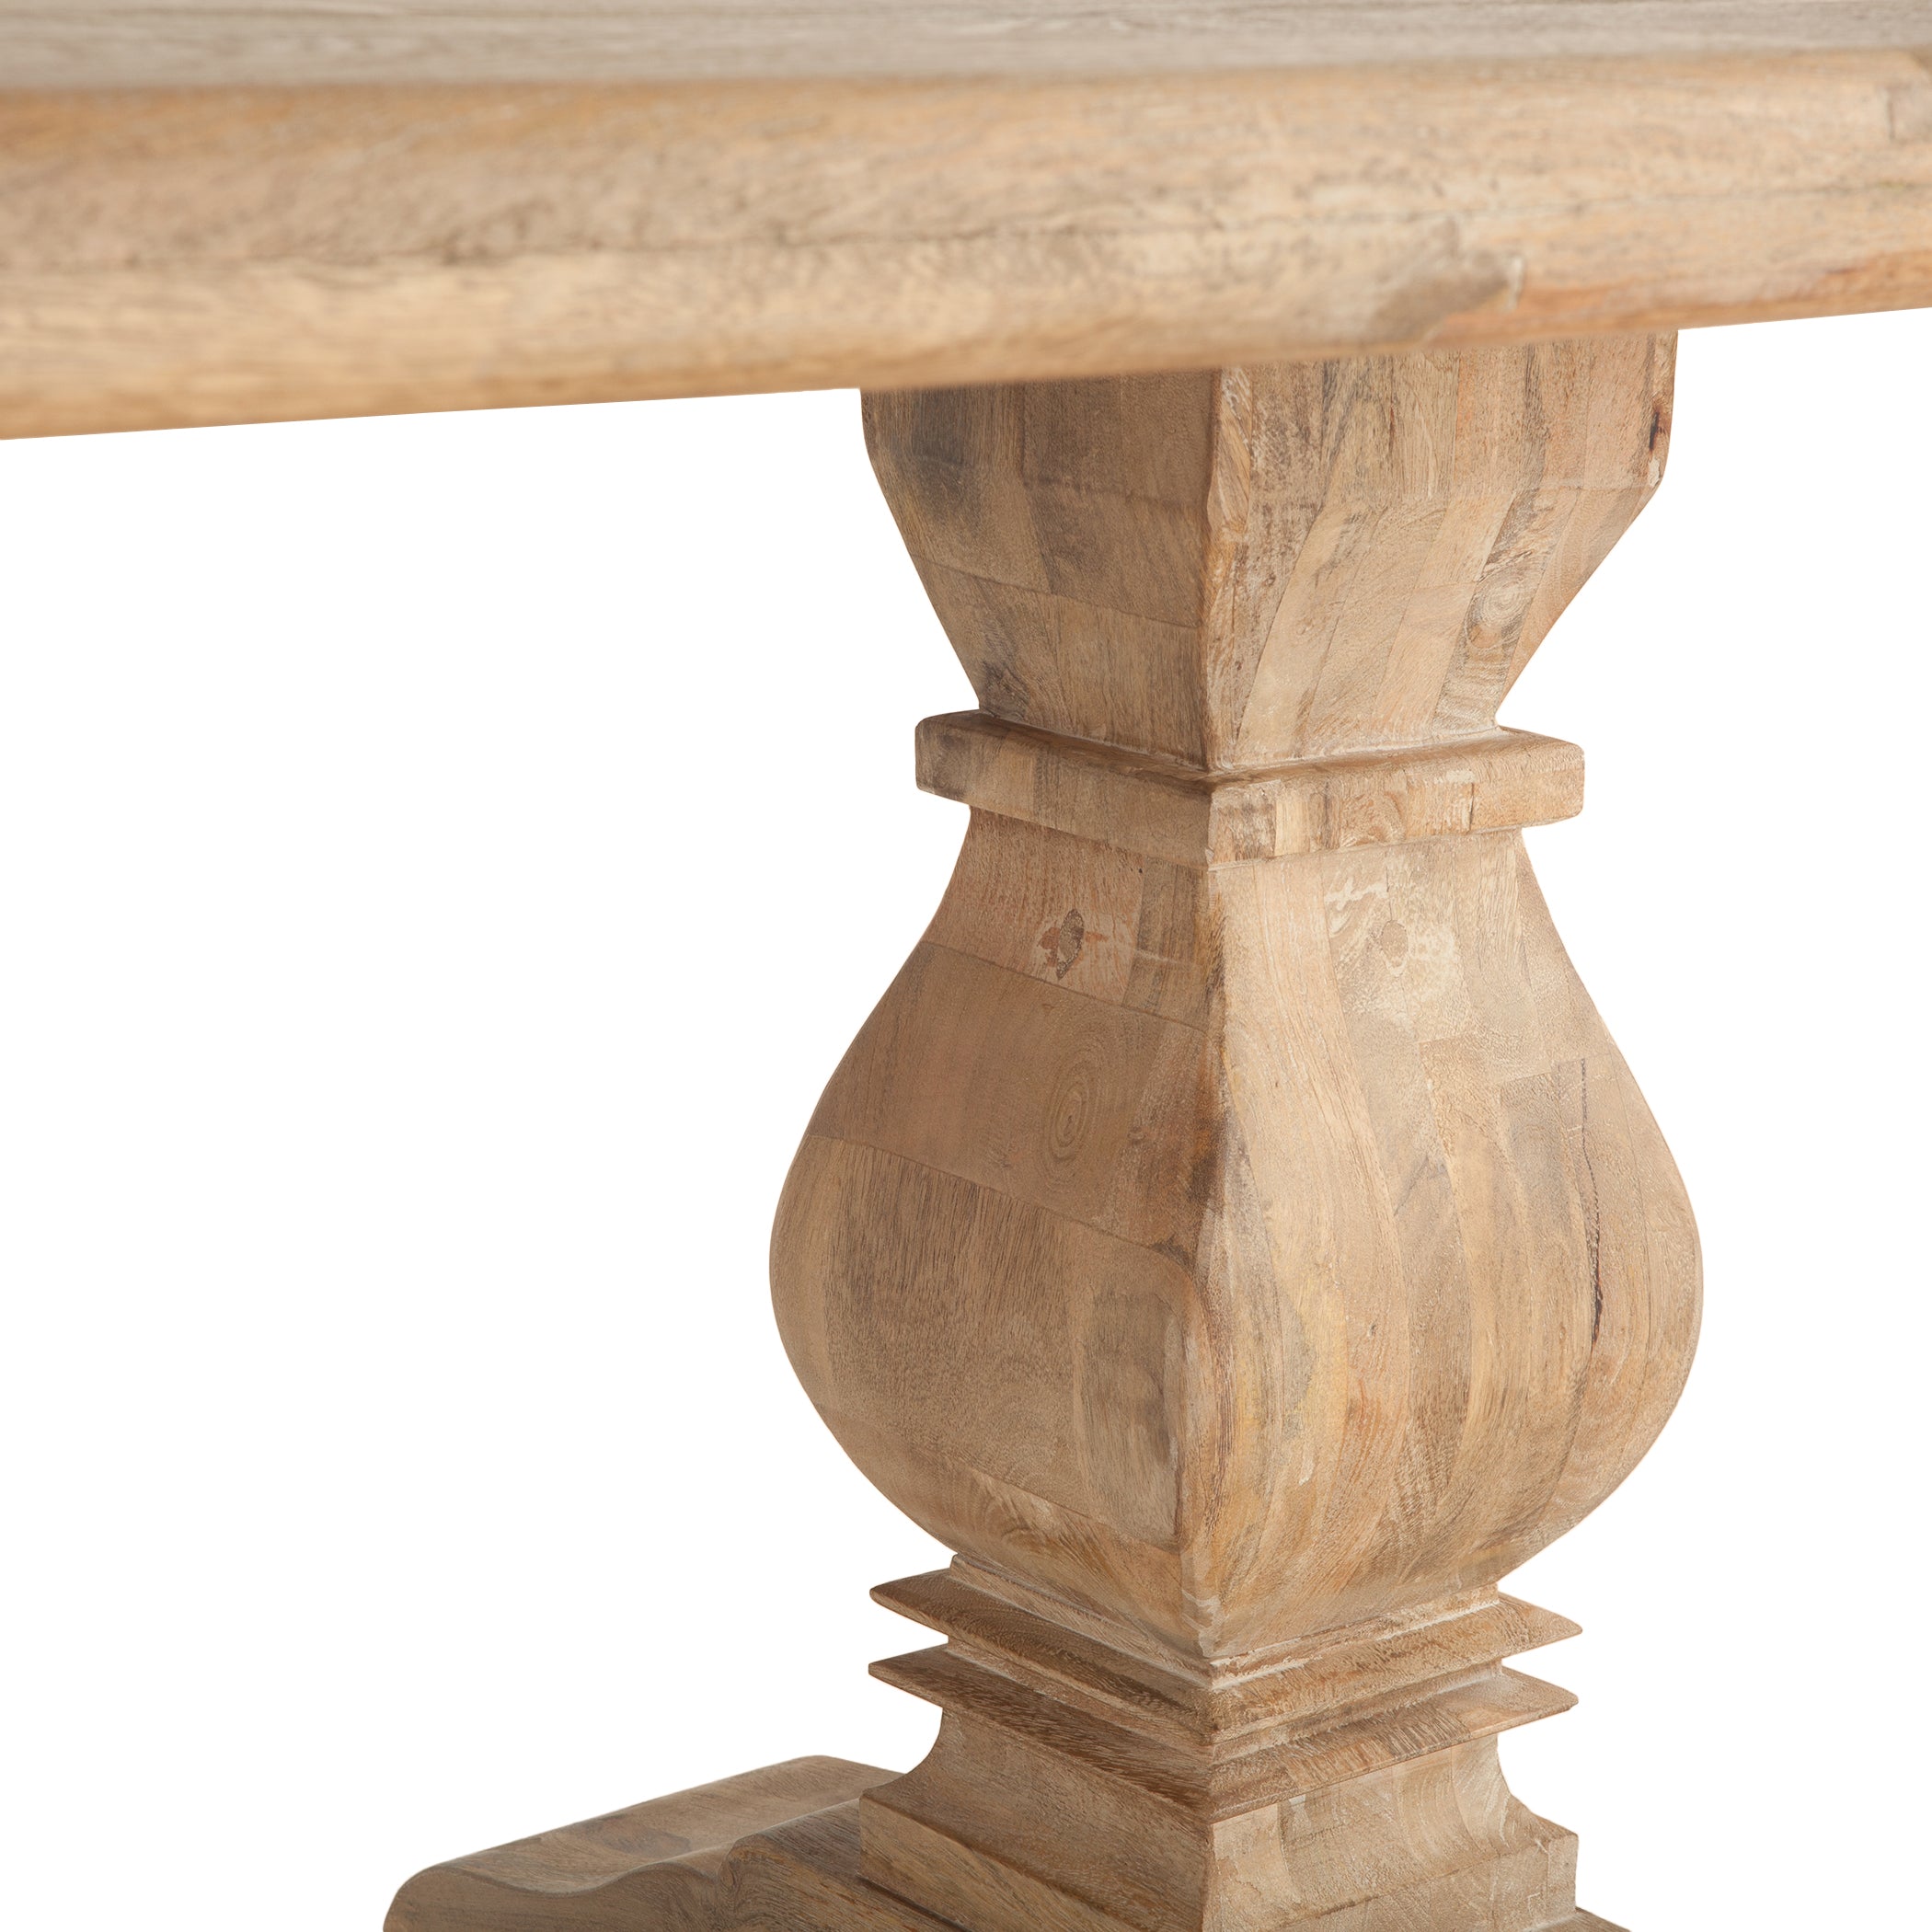 Pengrove Dining Table